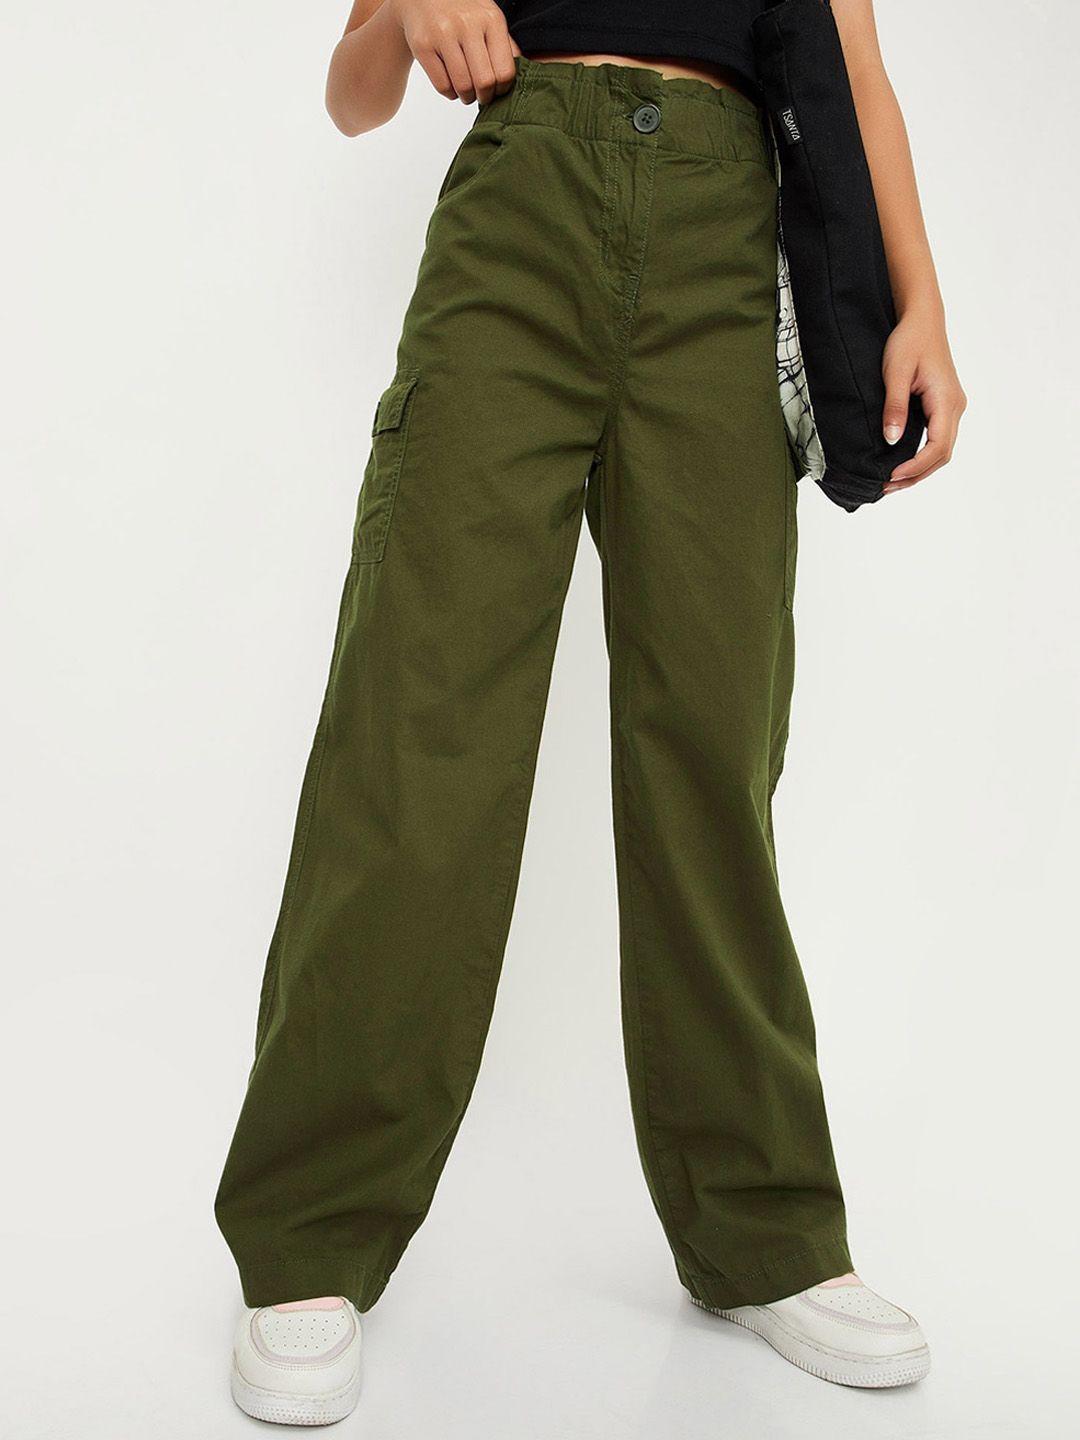 max Girls Mid-Rise Pure Cotton Cargos